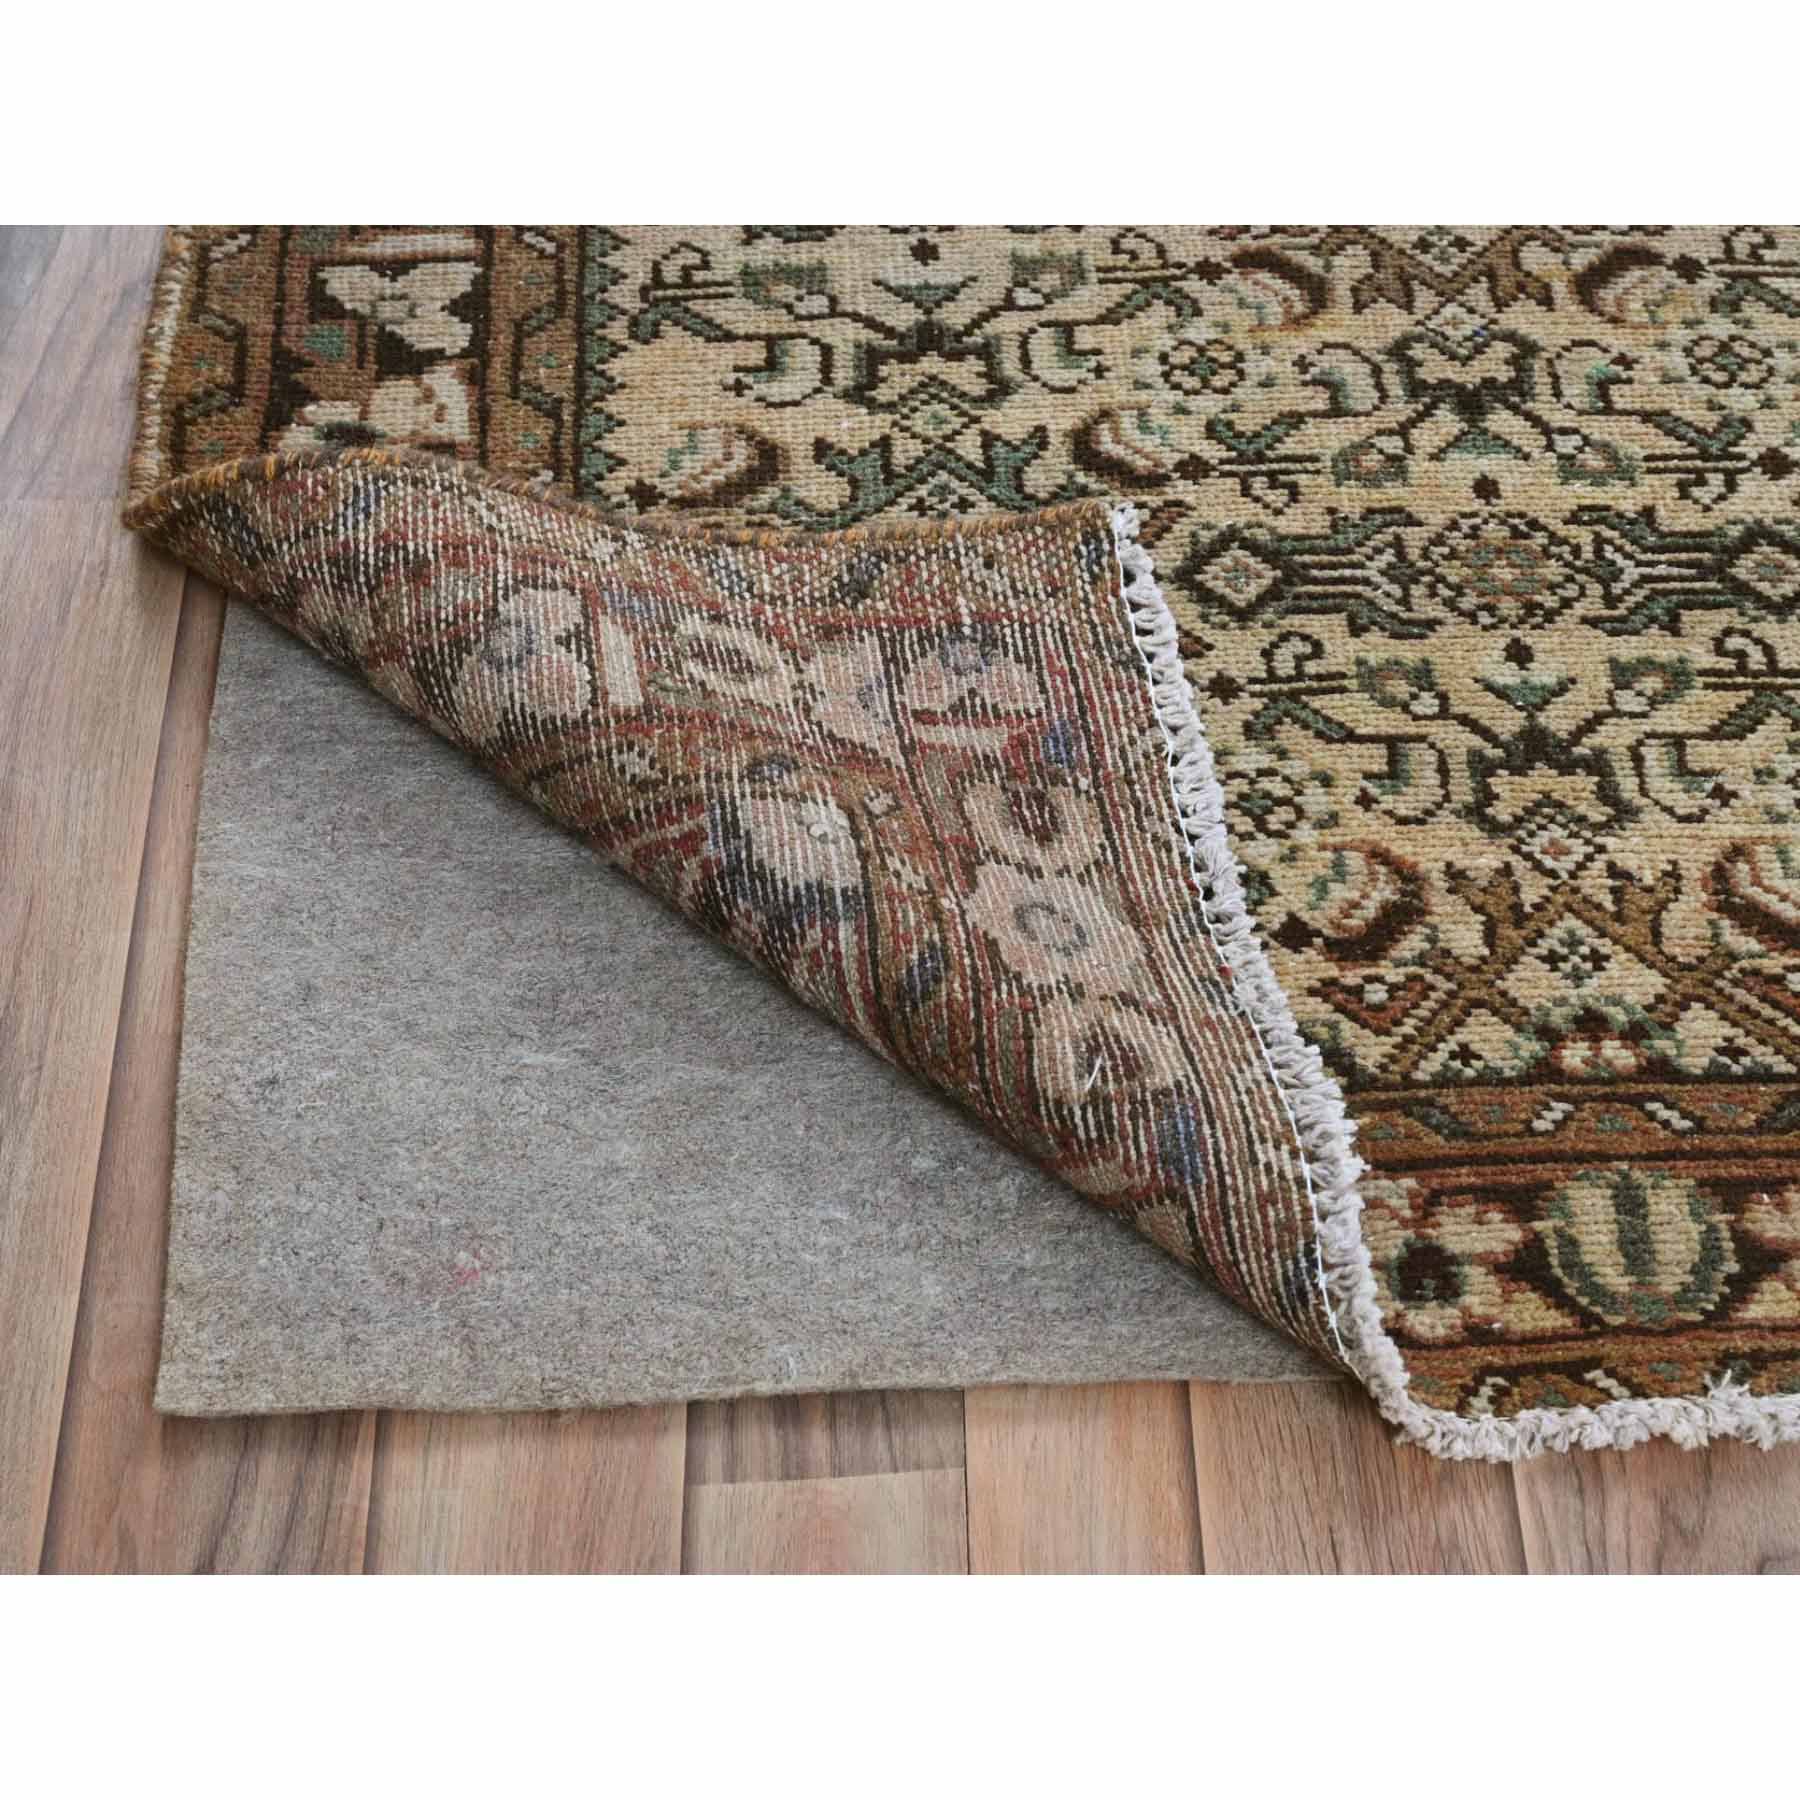 Overdyed-Vintage-Hand-Knotted-Rug-409500